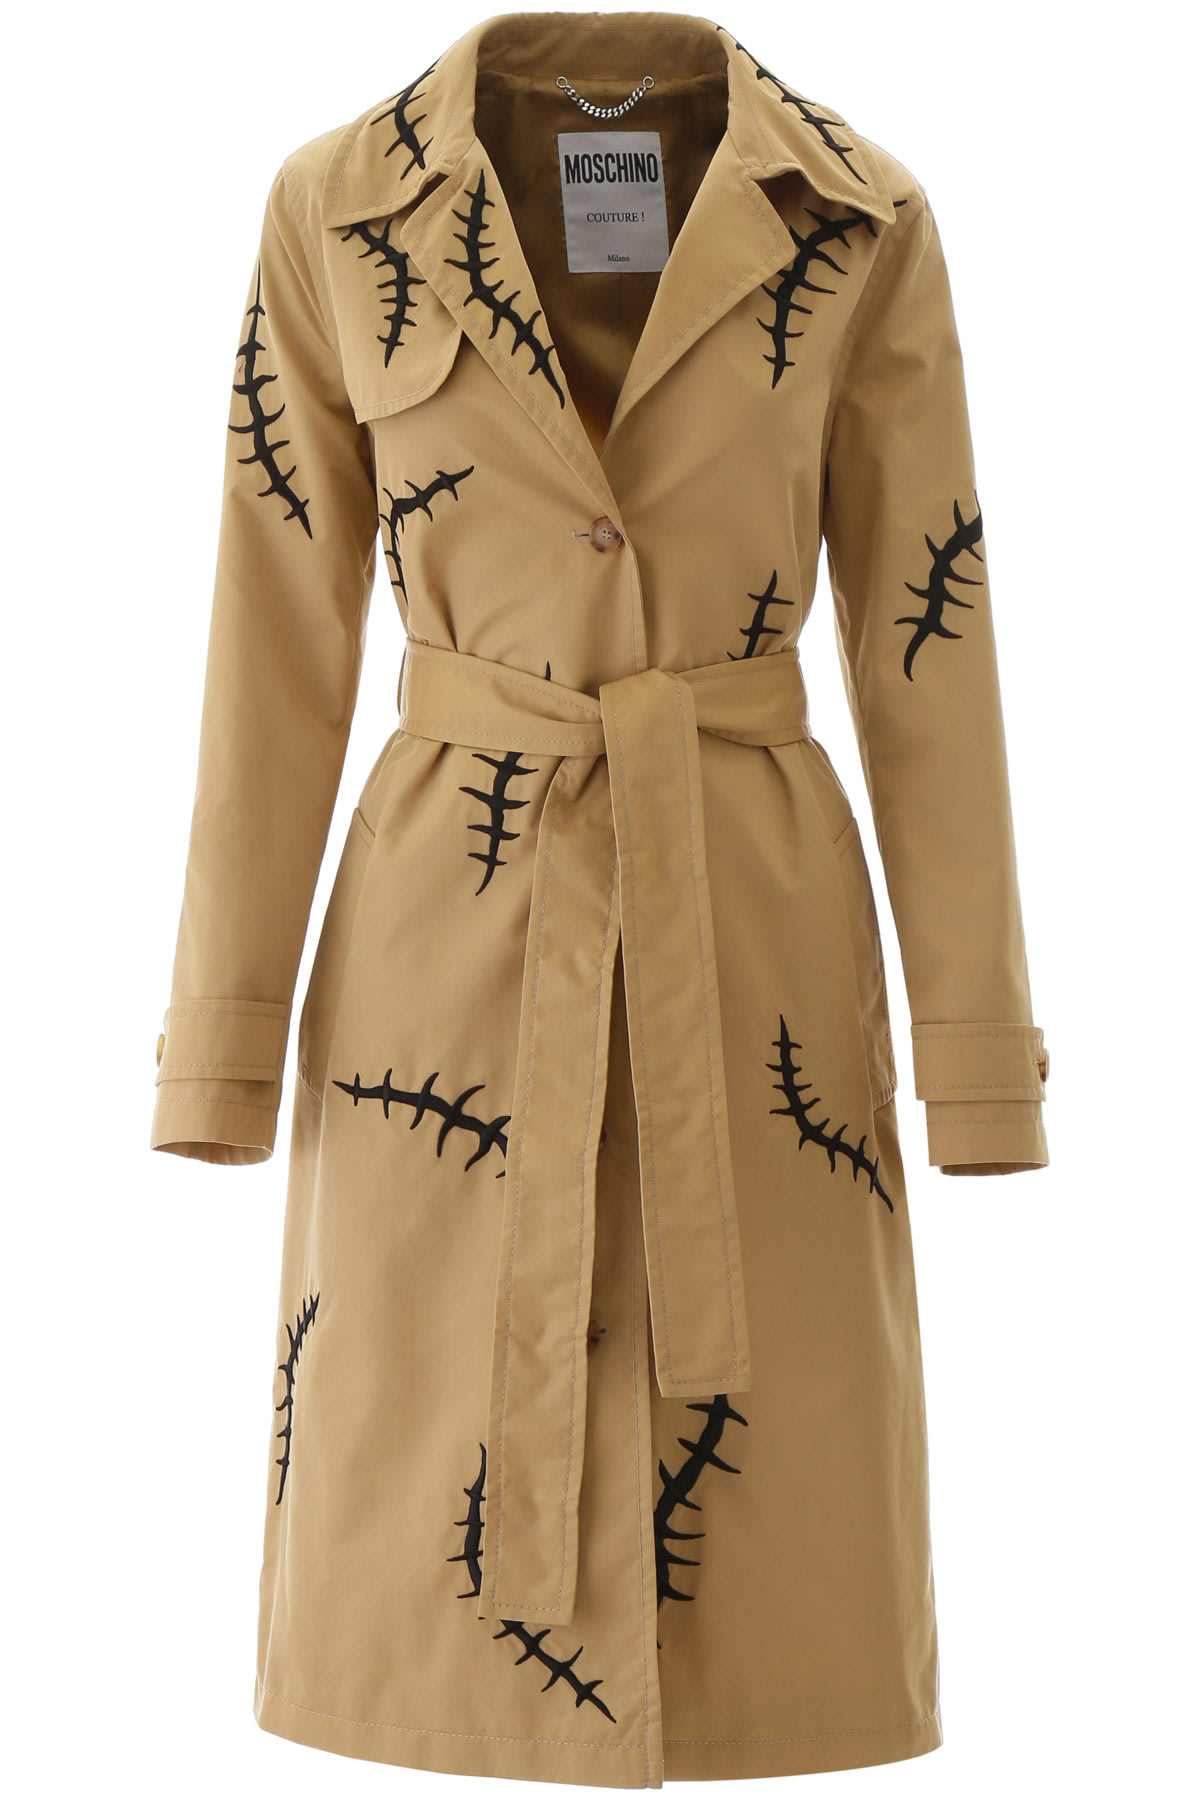 MOSCHINO EMBROIDERED TRENCH COAT,J0607 517 J1081